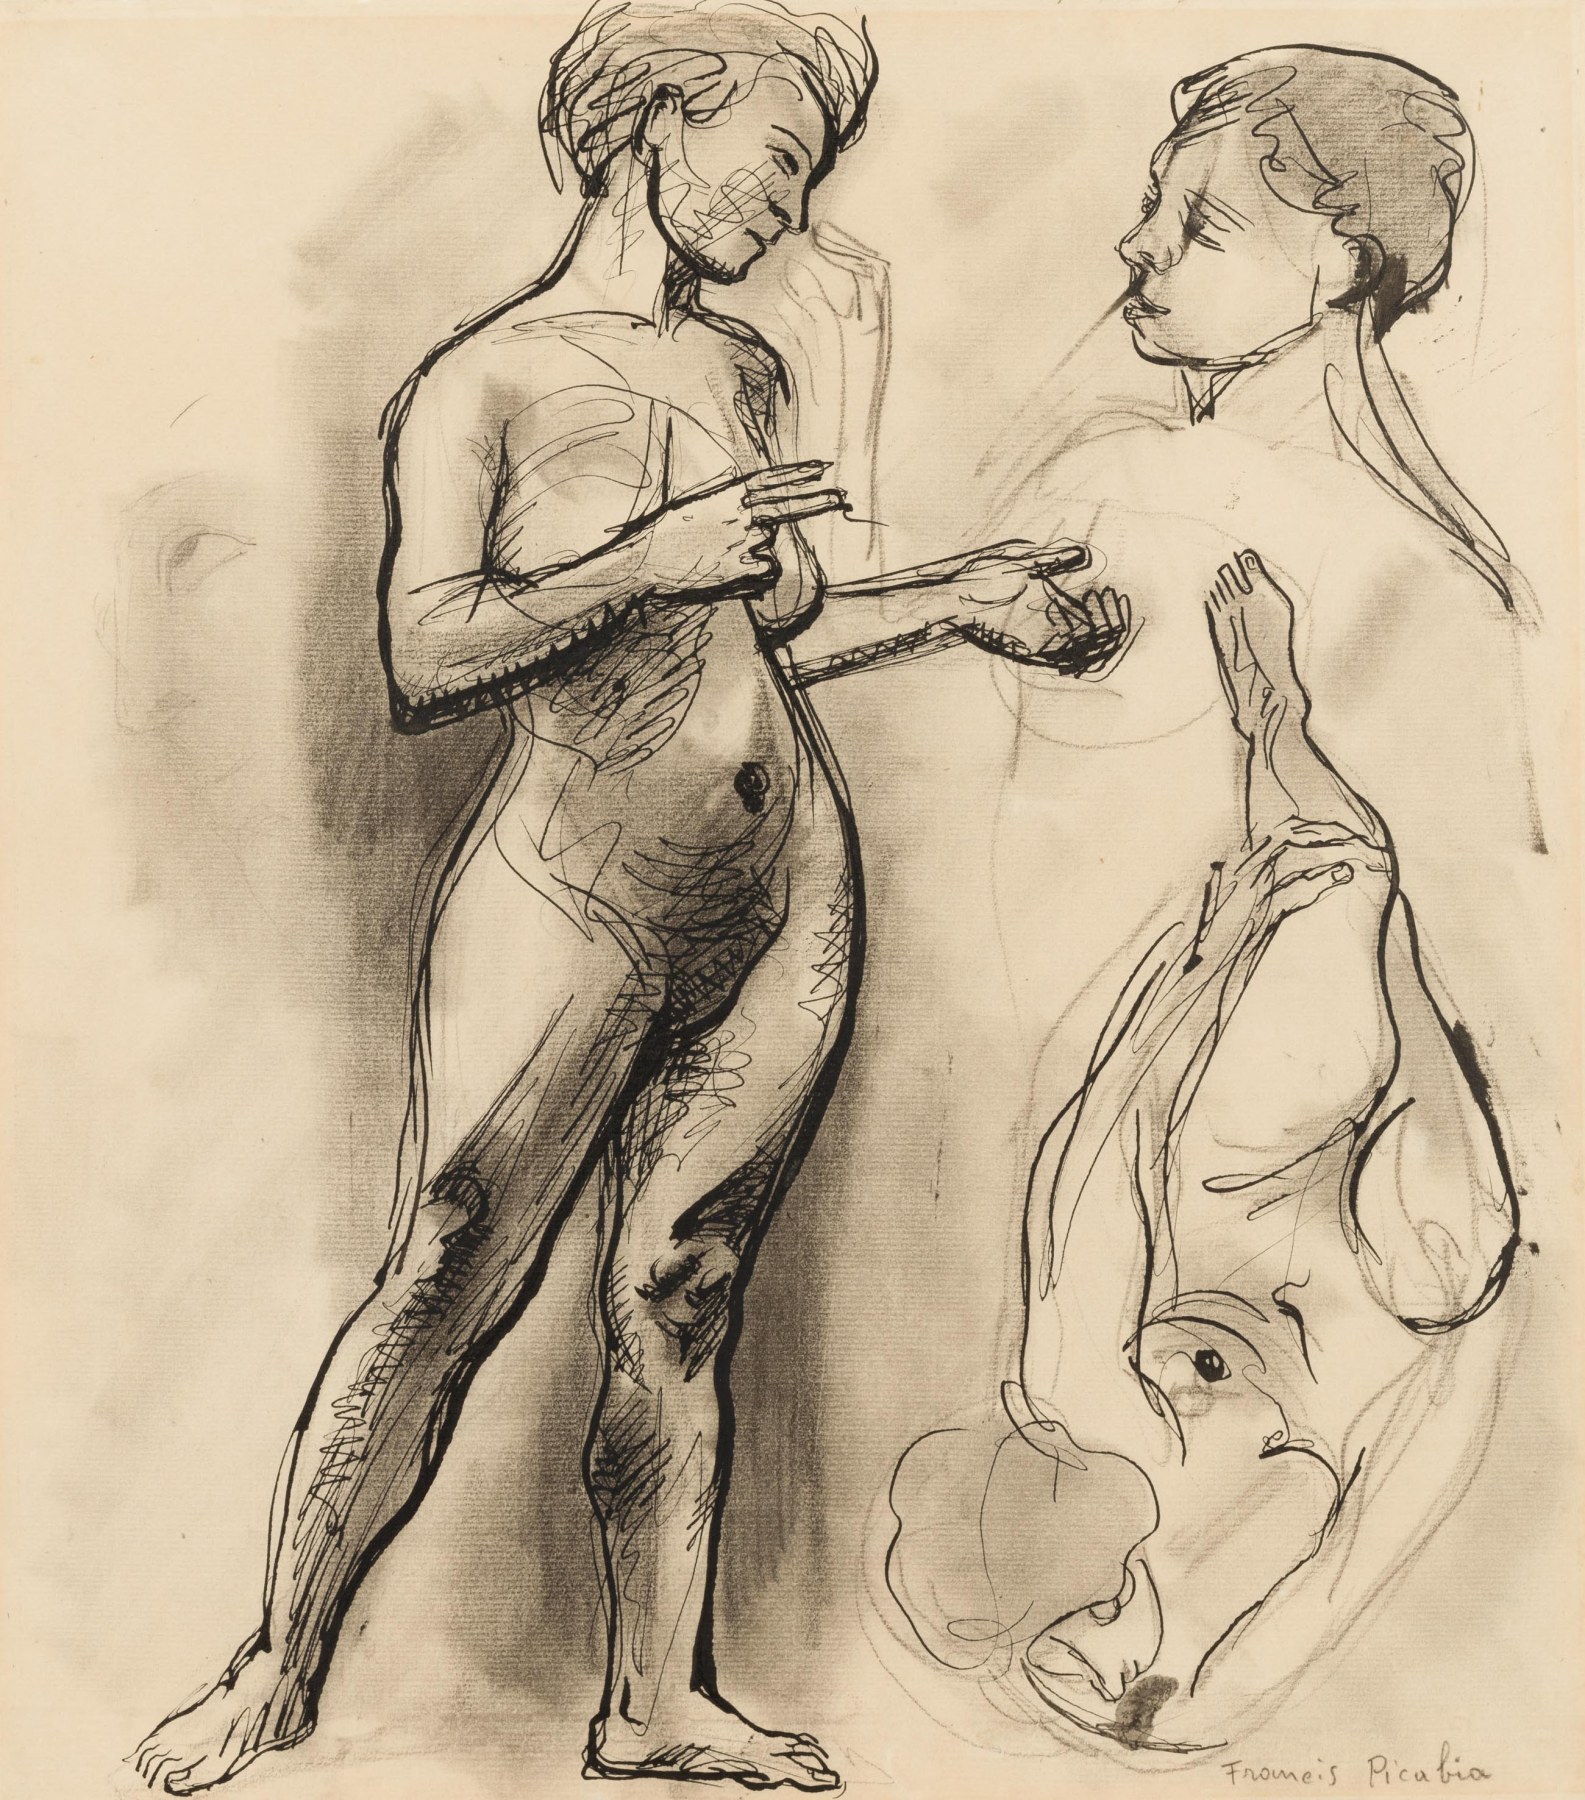 Francis Picabia

&amp;ldquo;Etude pour Transparence&amp;rdquo;, ca. 1932

Charcoal, ink, pencil on paper

14 x 12 1/4 inches

35.5 x 31.5 cm

PIZ 12

$140,000